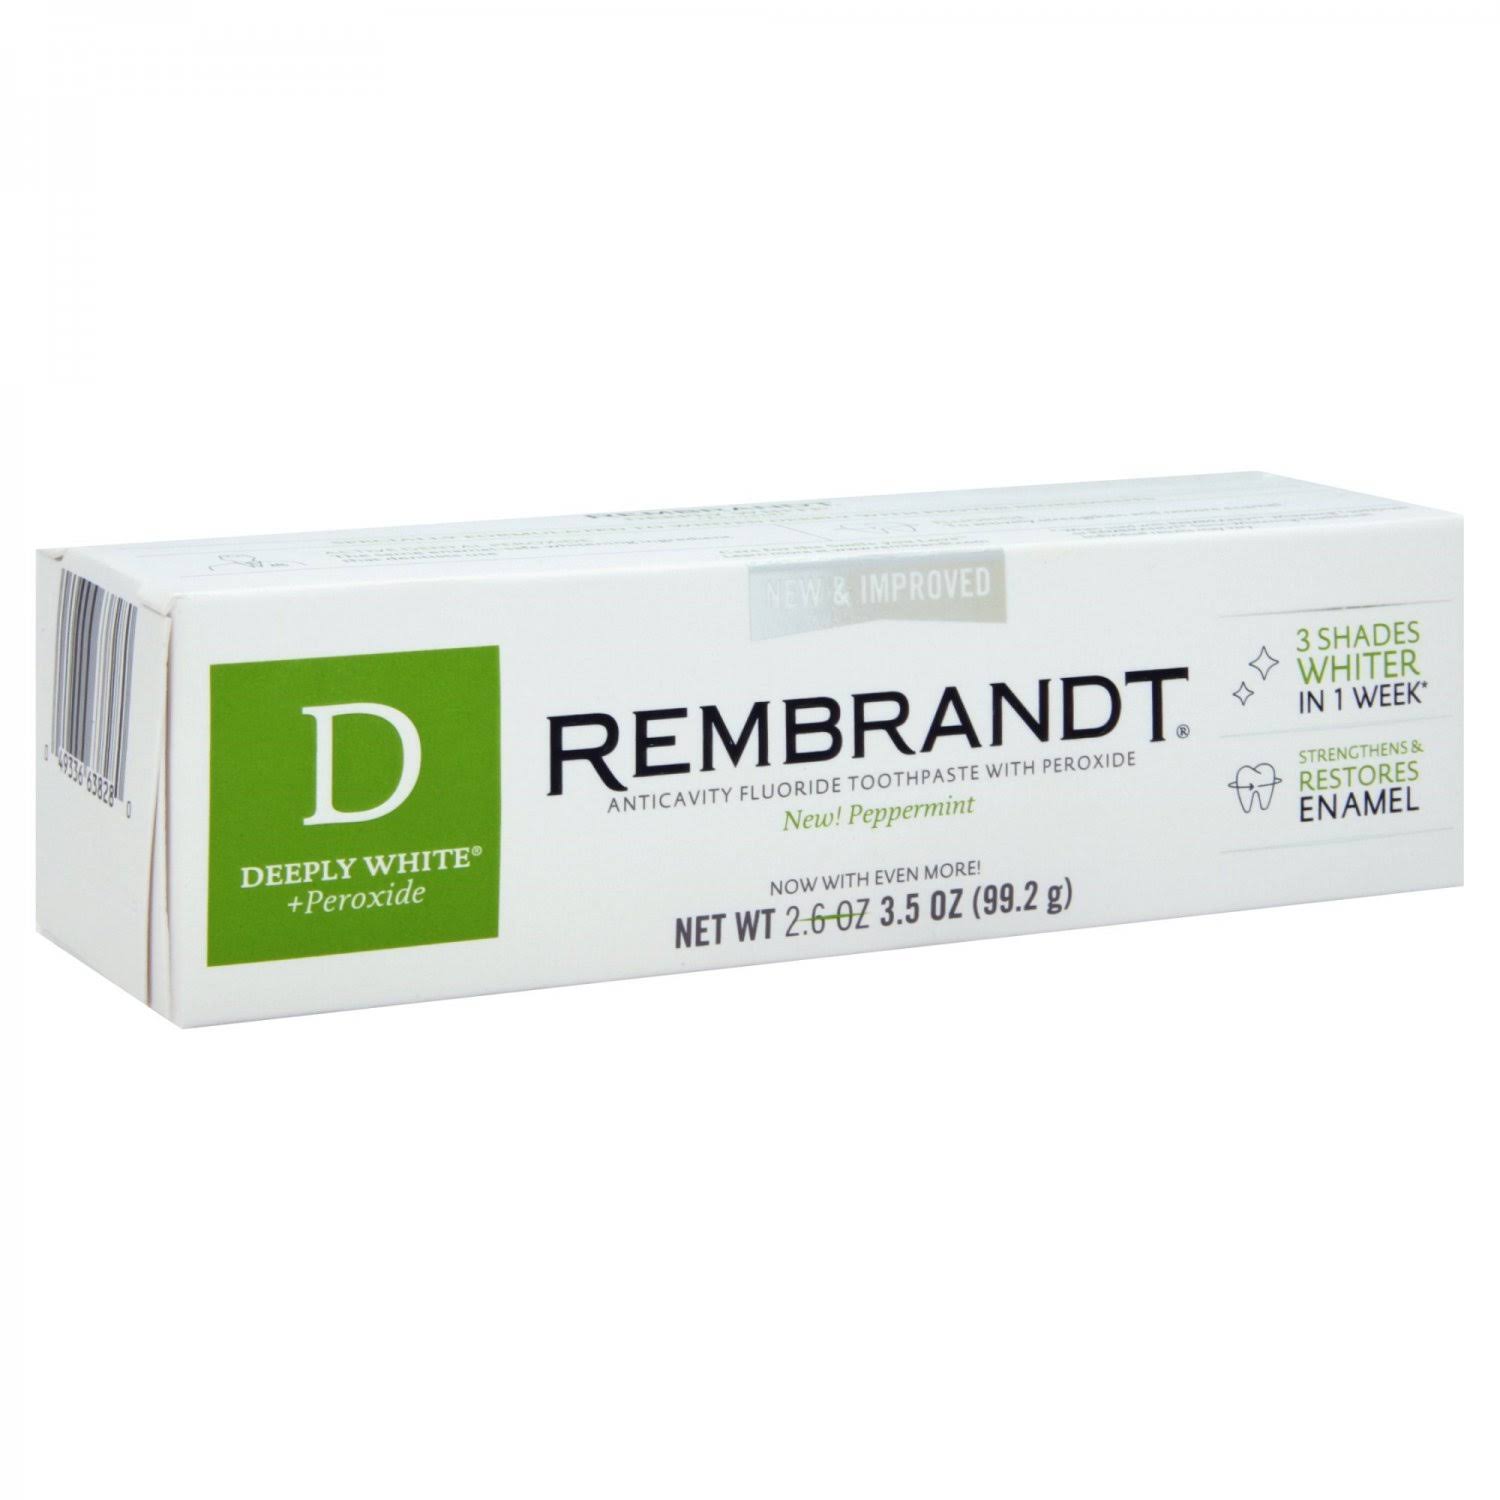 Rembrandt Anticavity Fluoride Toothpaste, 3.5 oz (99.2 g), Peppermint